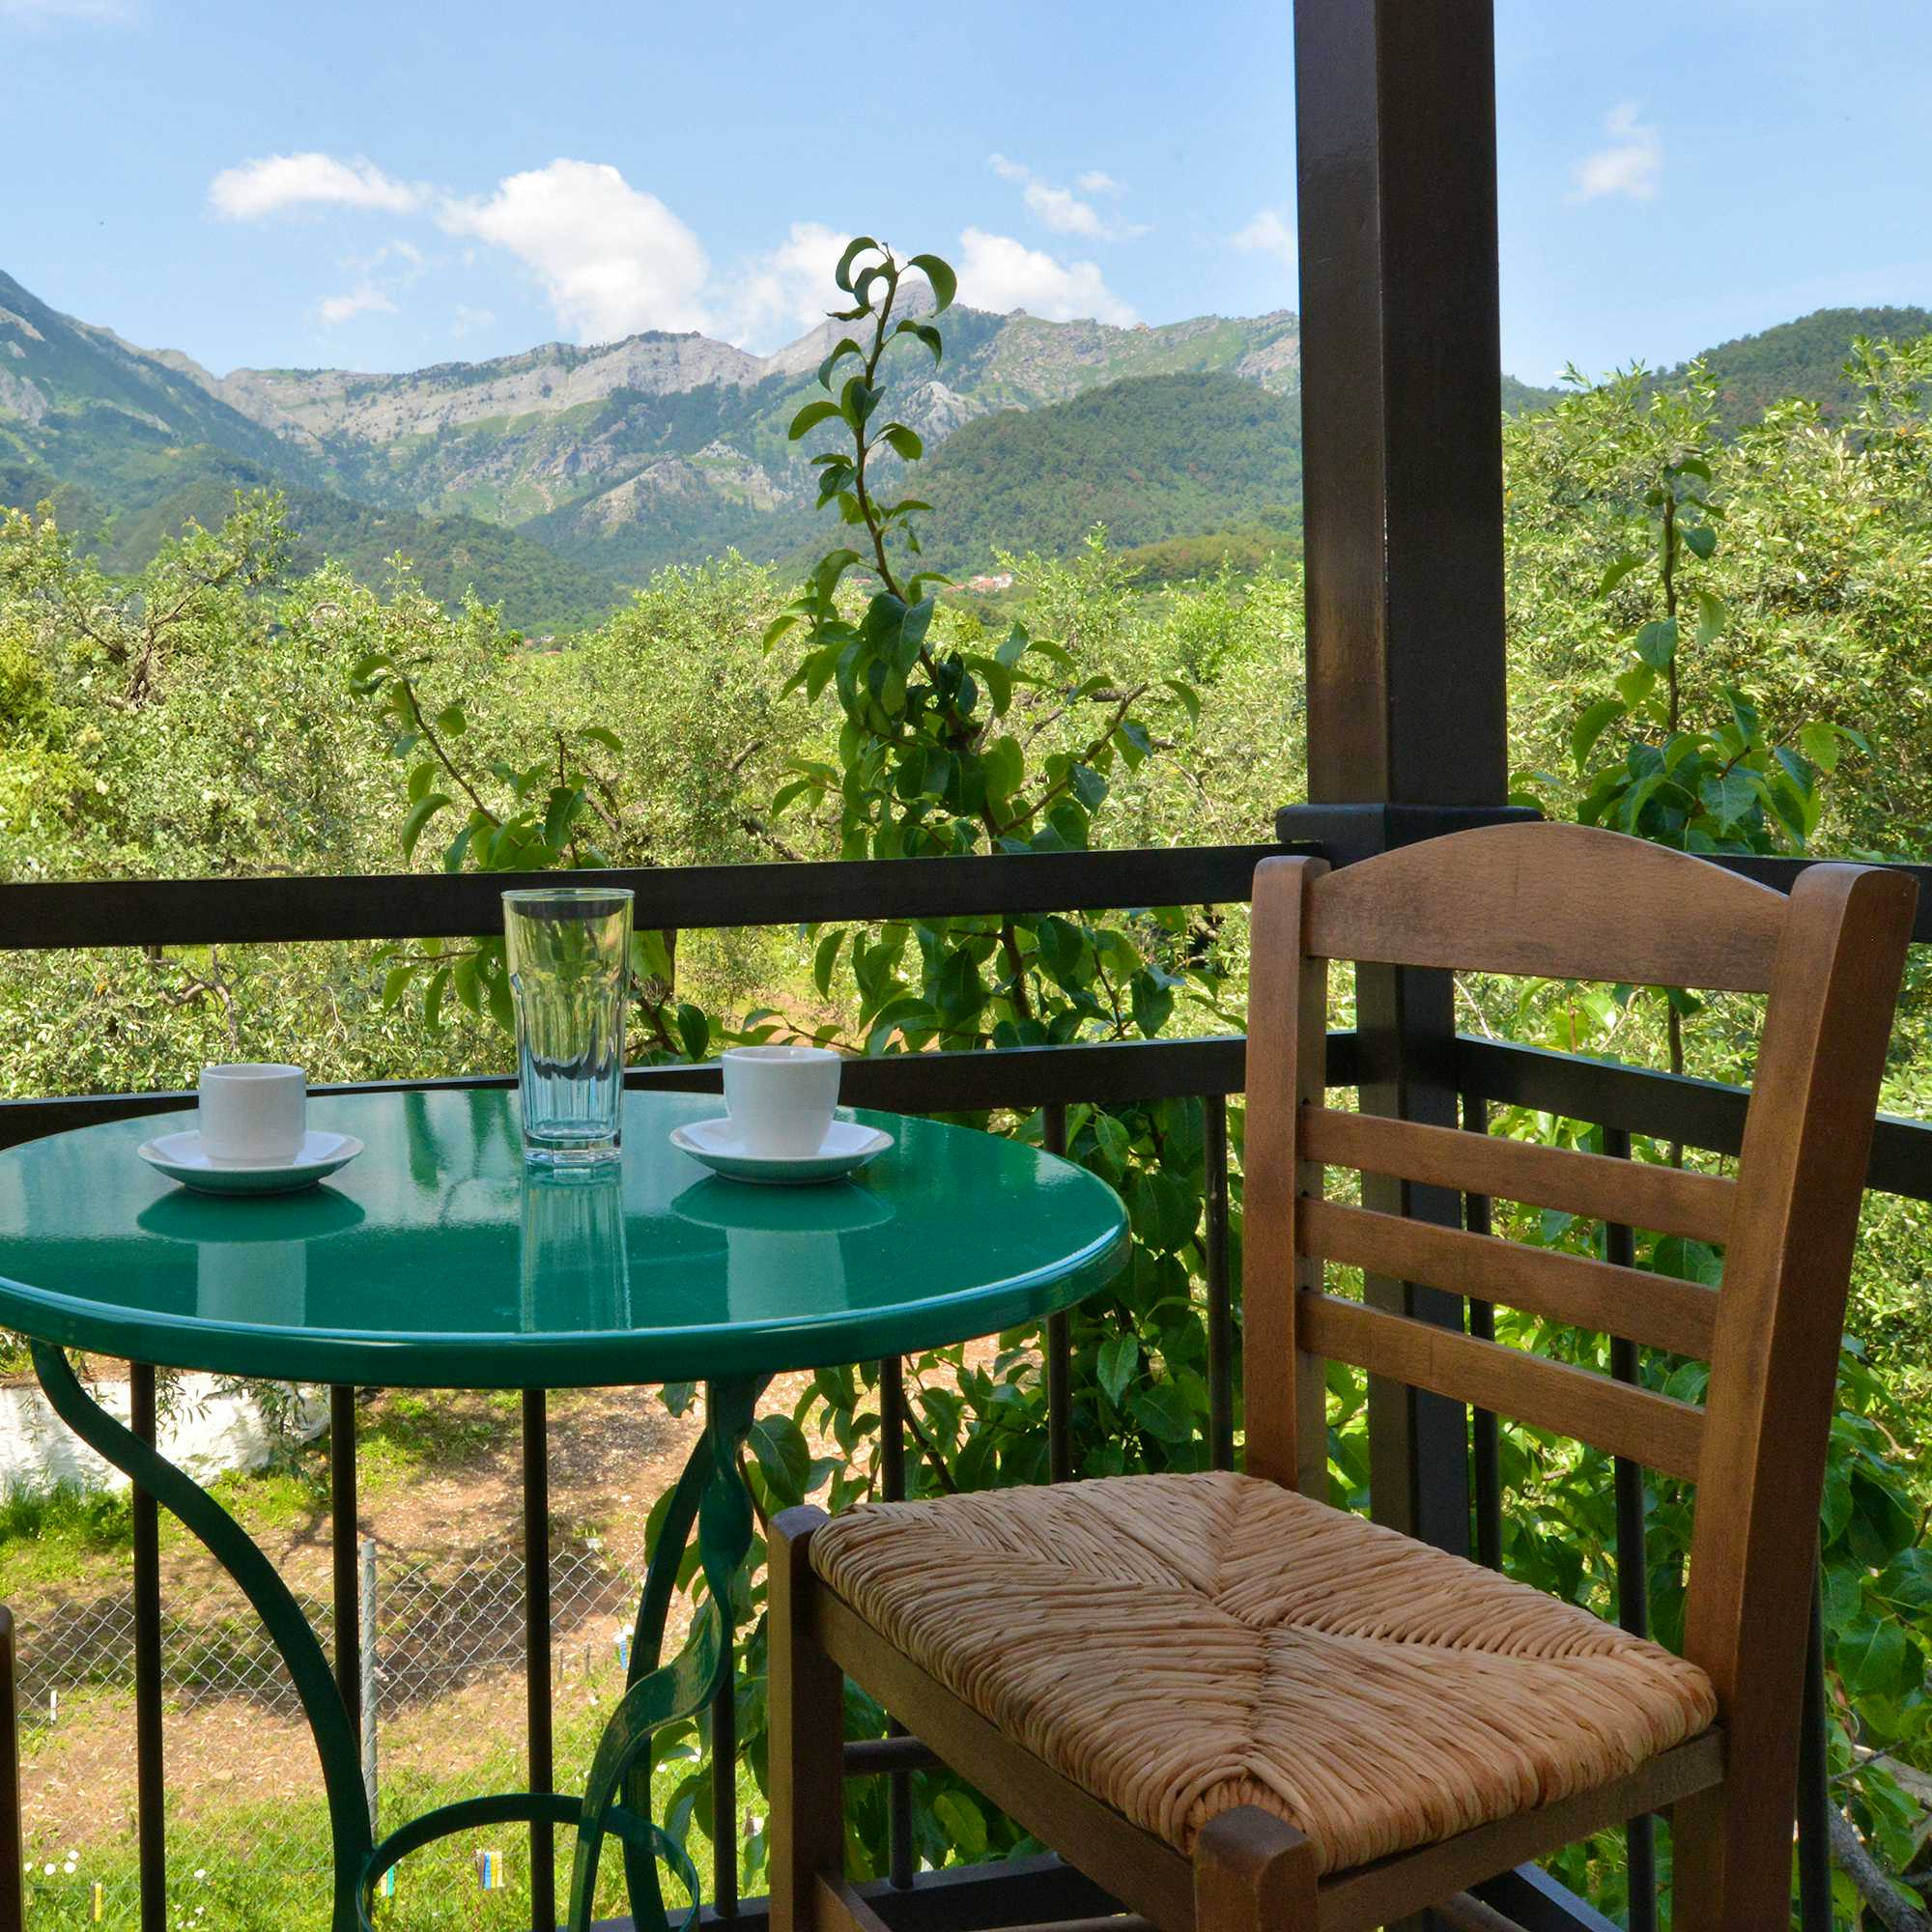 Photo Caption: Enjoy a morning coffee and nature's aromas from your balcony